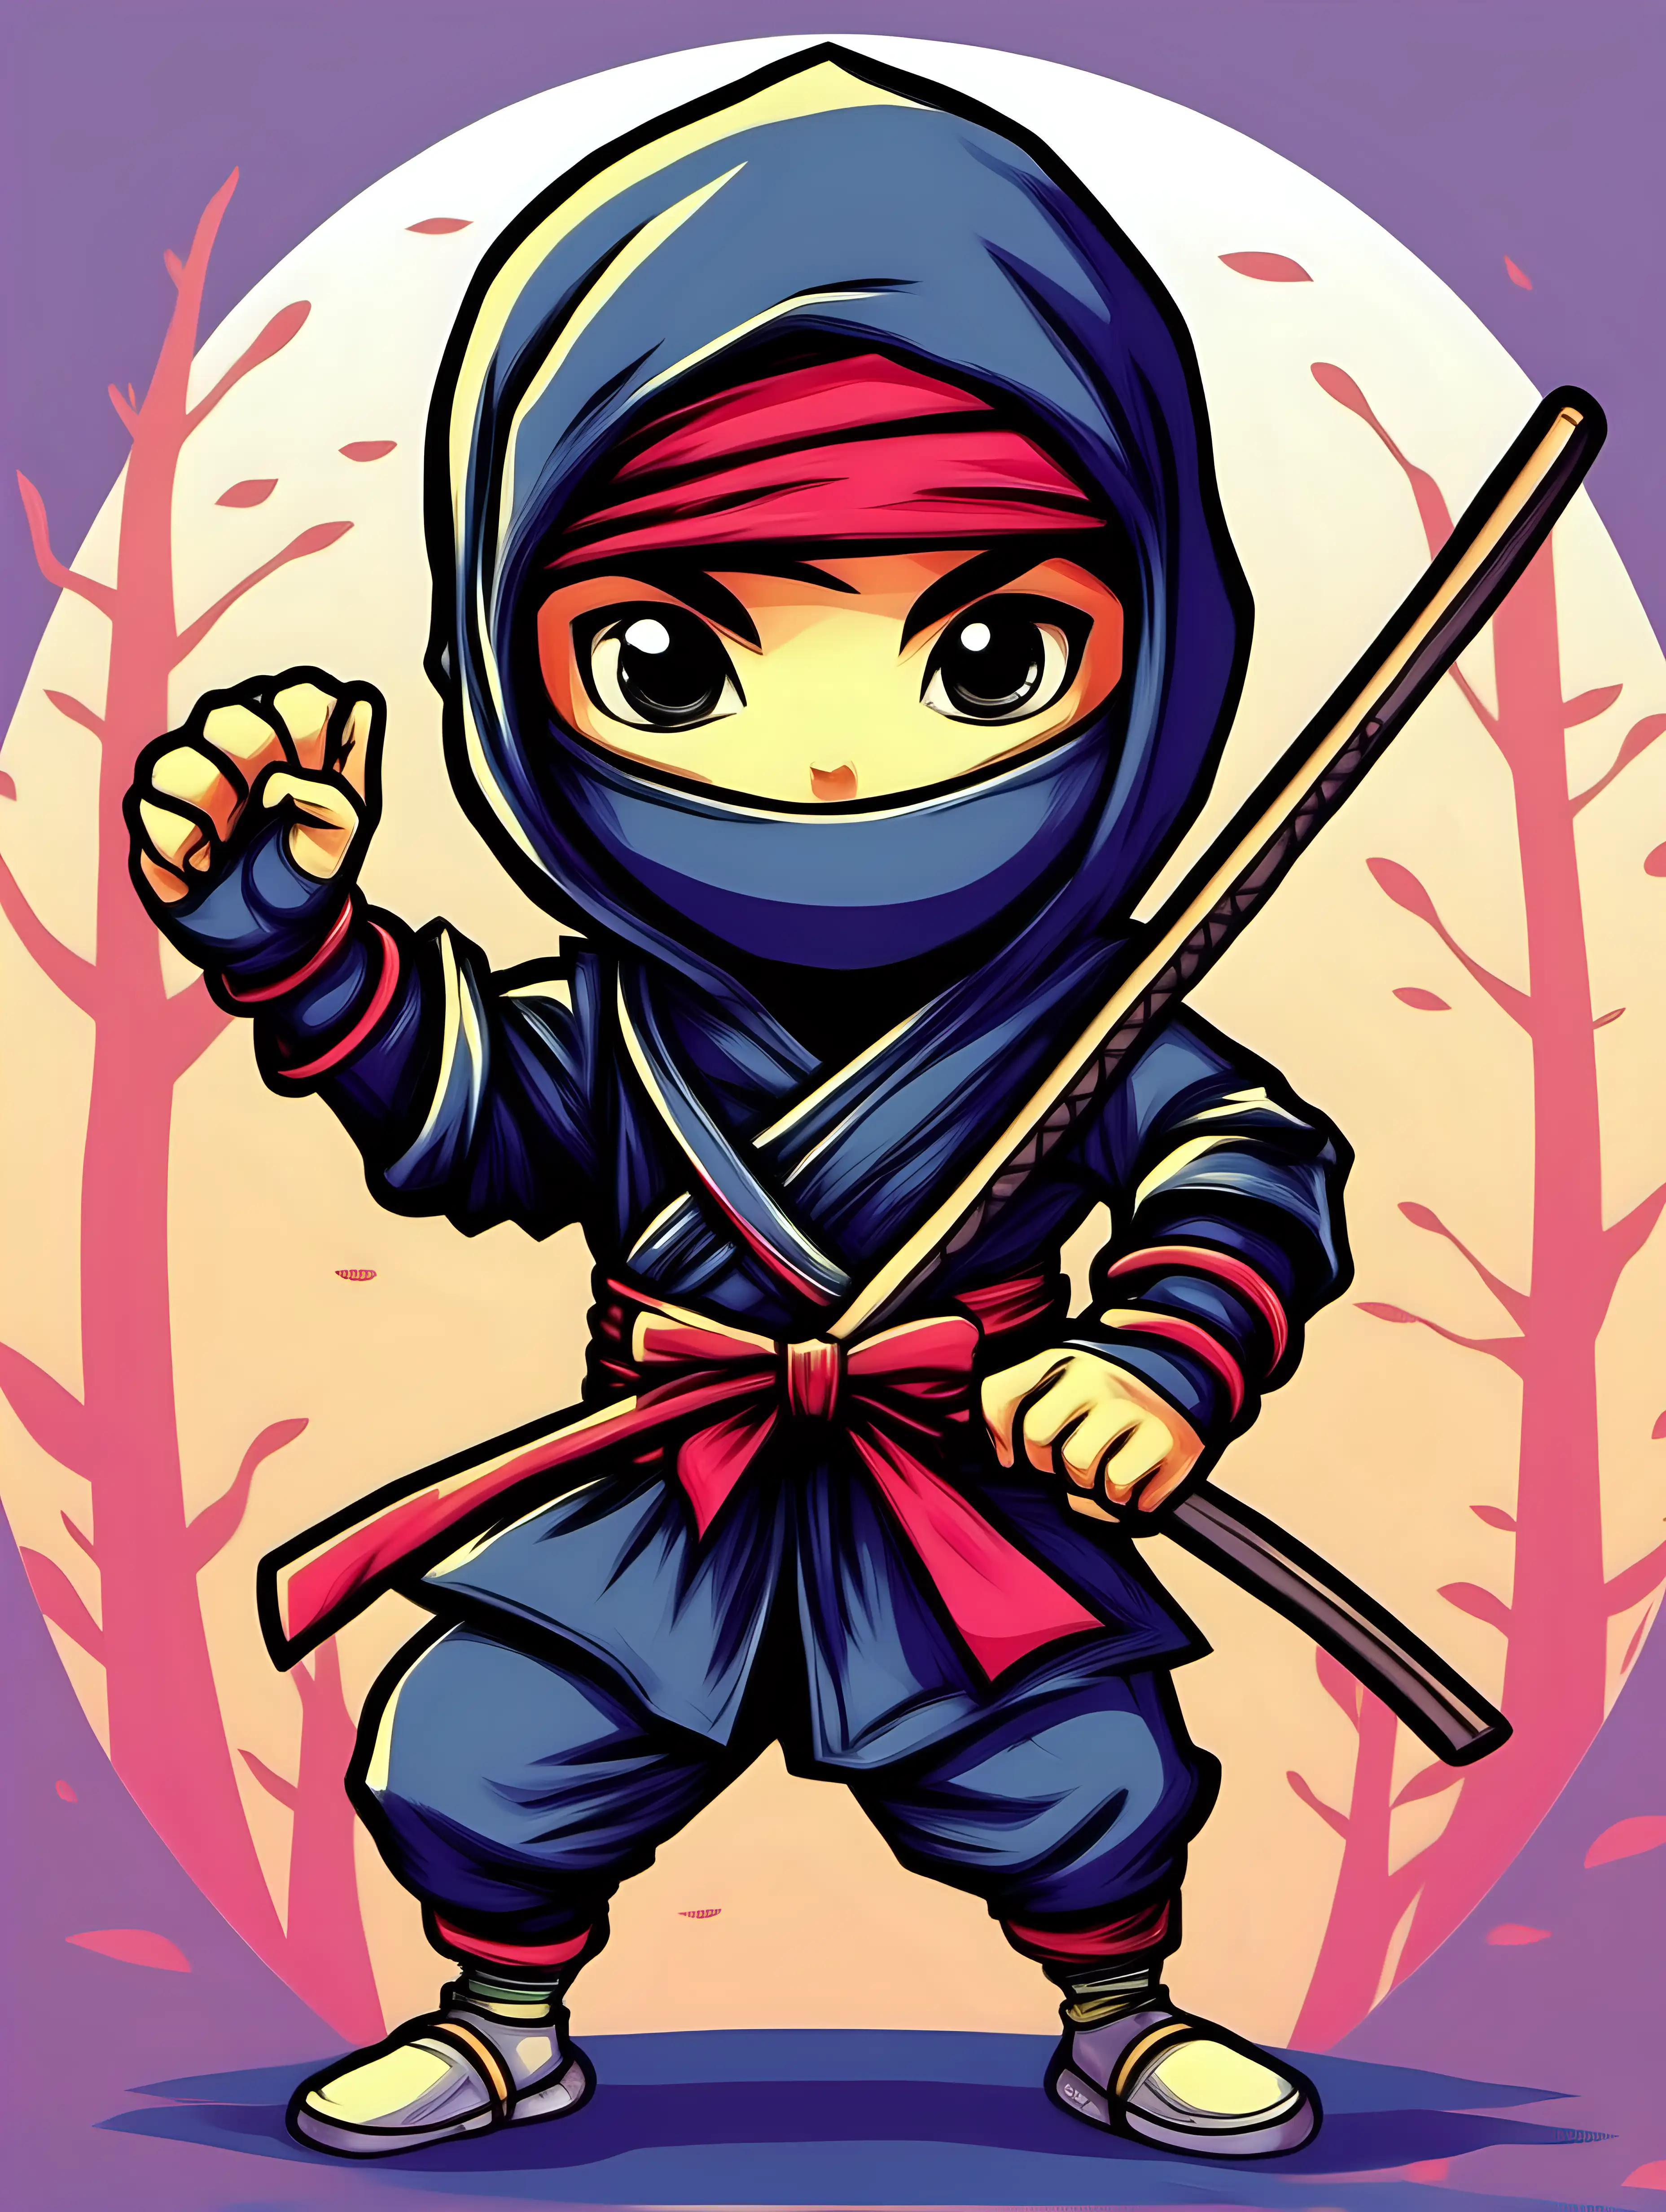 Colorized Stylized Illustration of a Cute Ninja Boy with Bow Staff